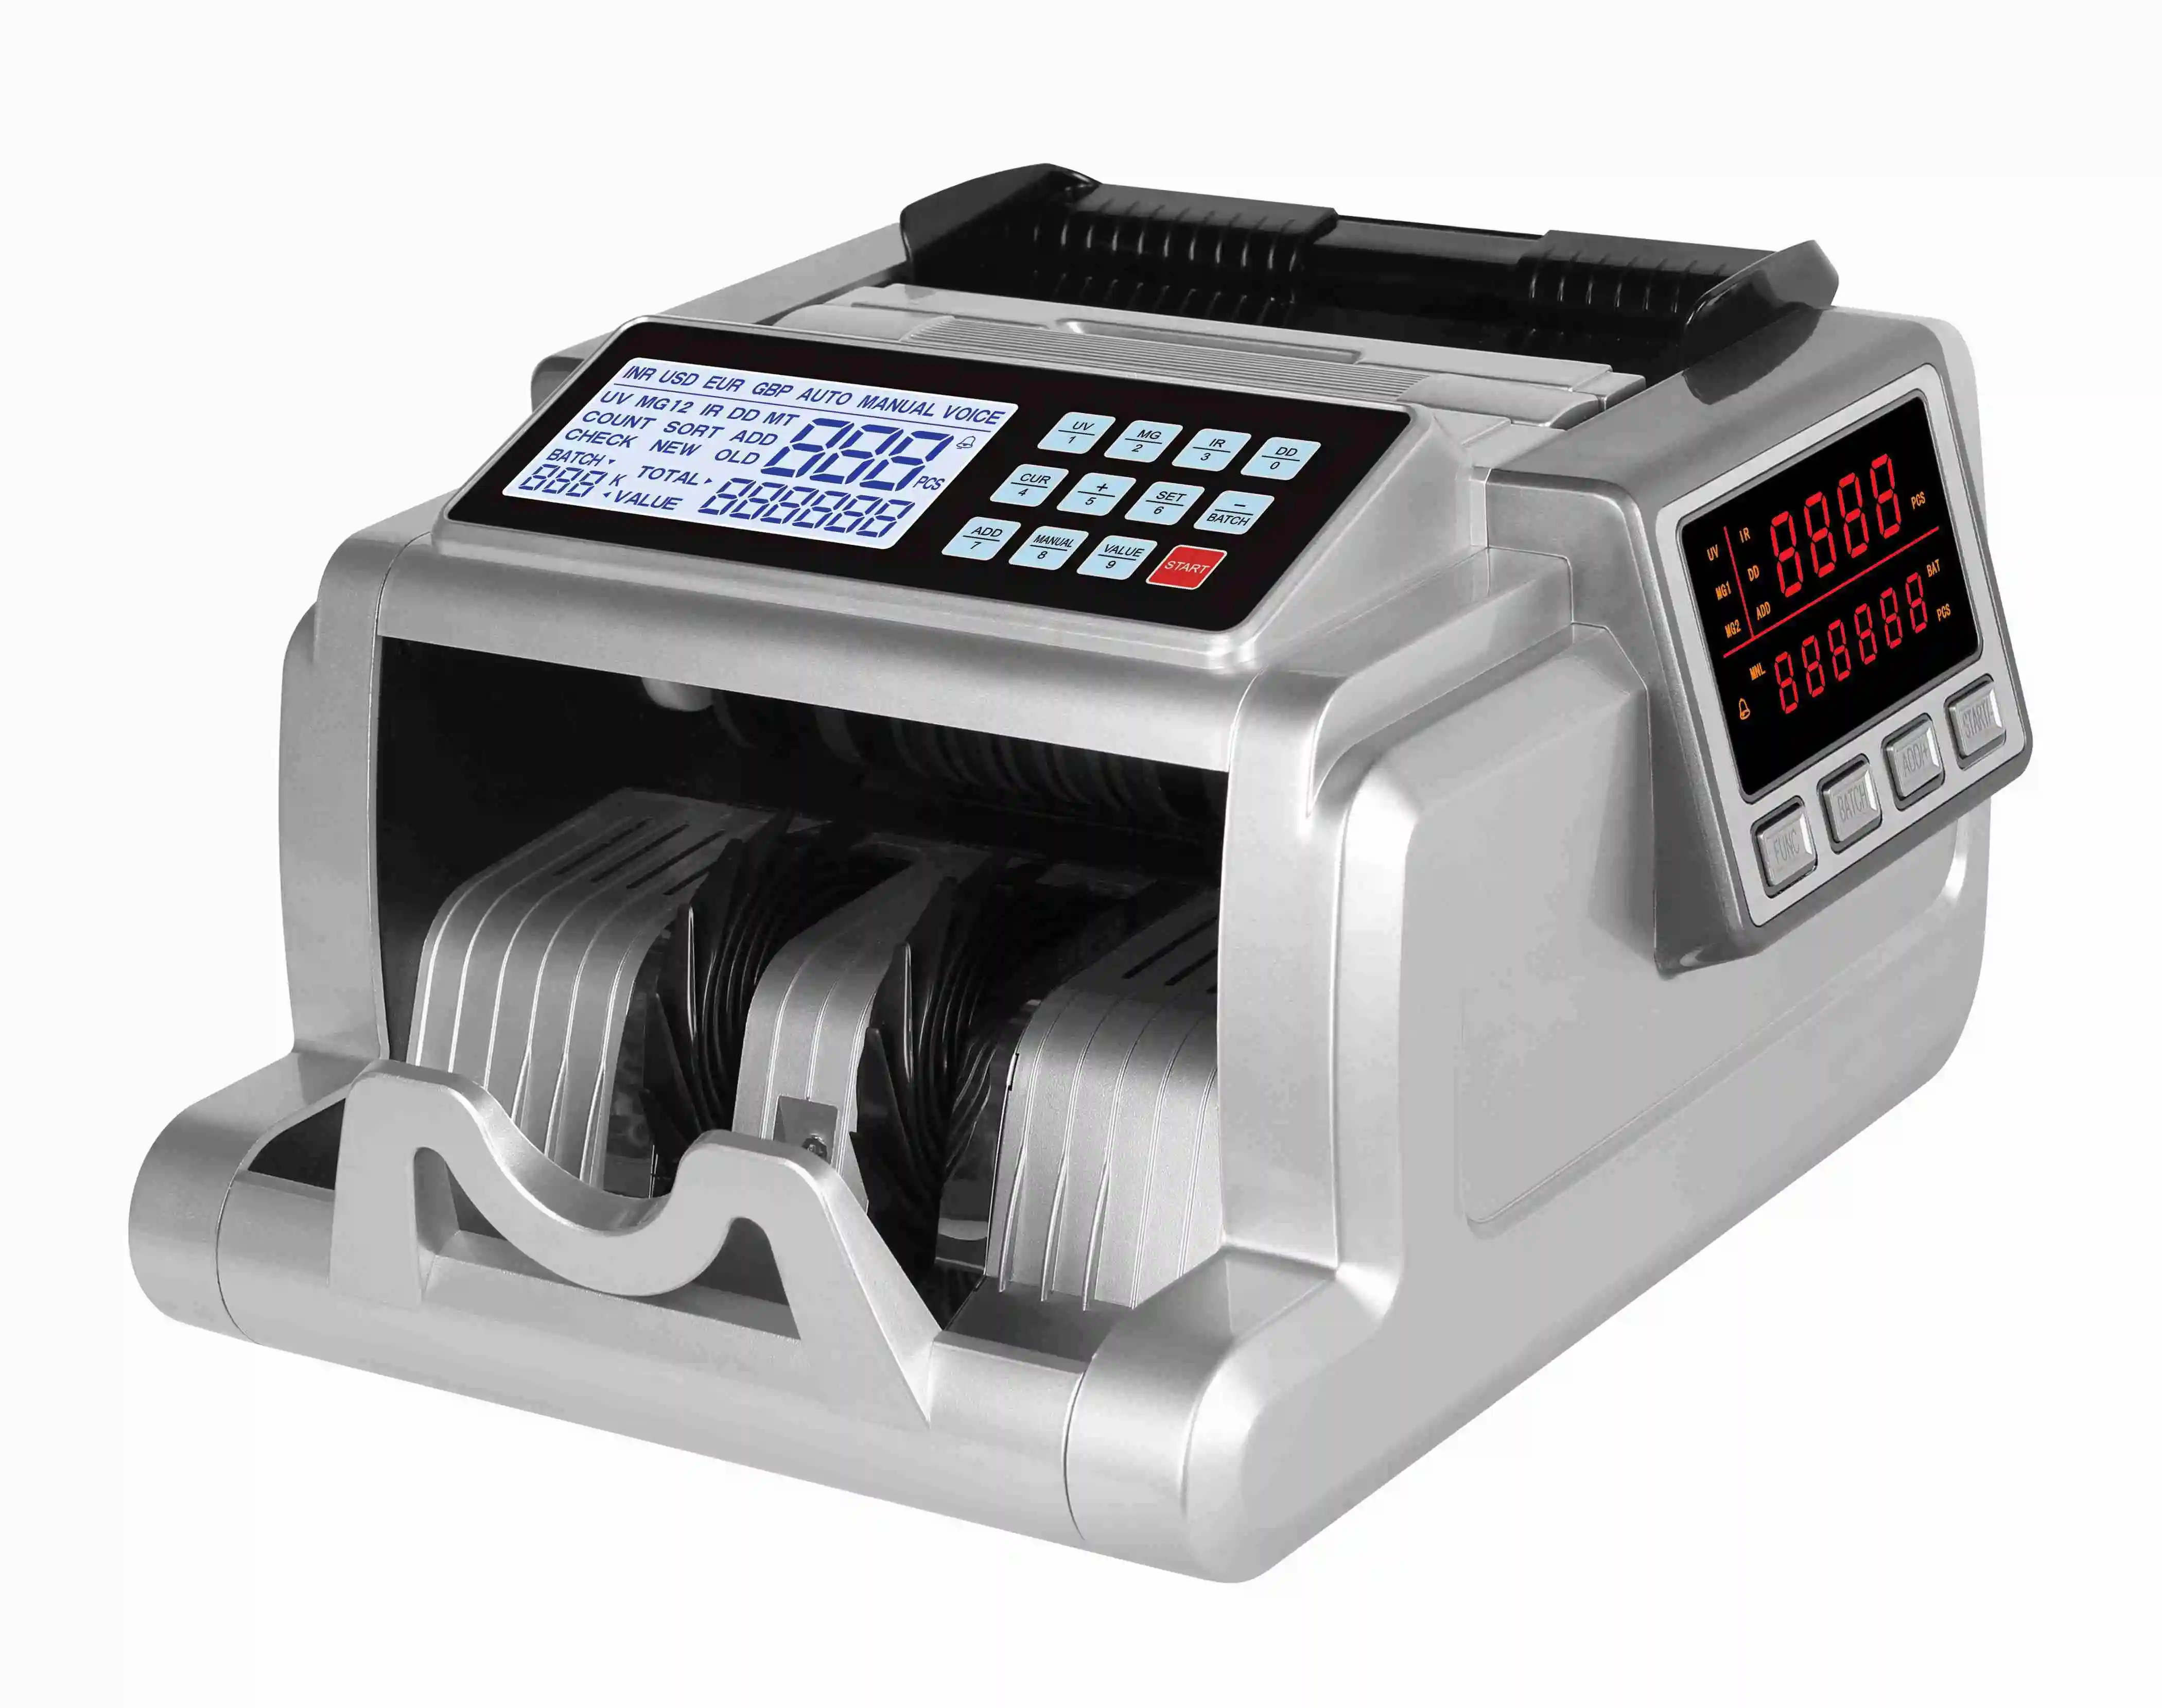 AL 6900W LCD Display Bill Counter With Total Value Calculating Function Handy Bill (1600618401090)